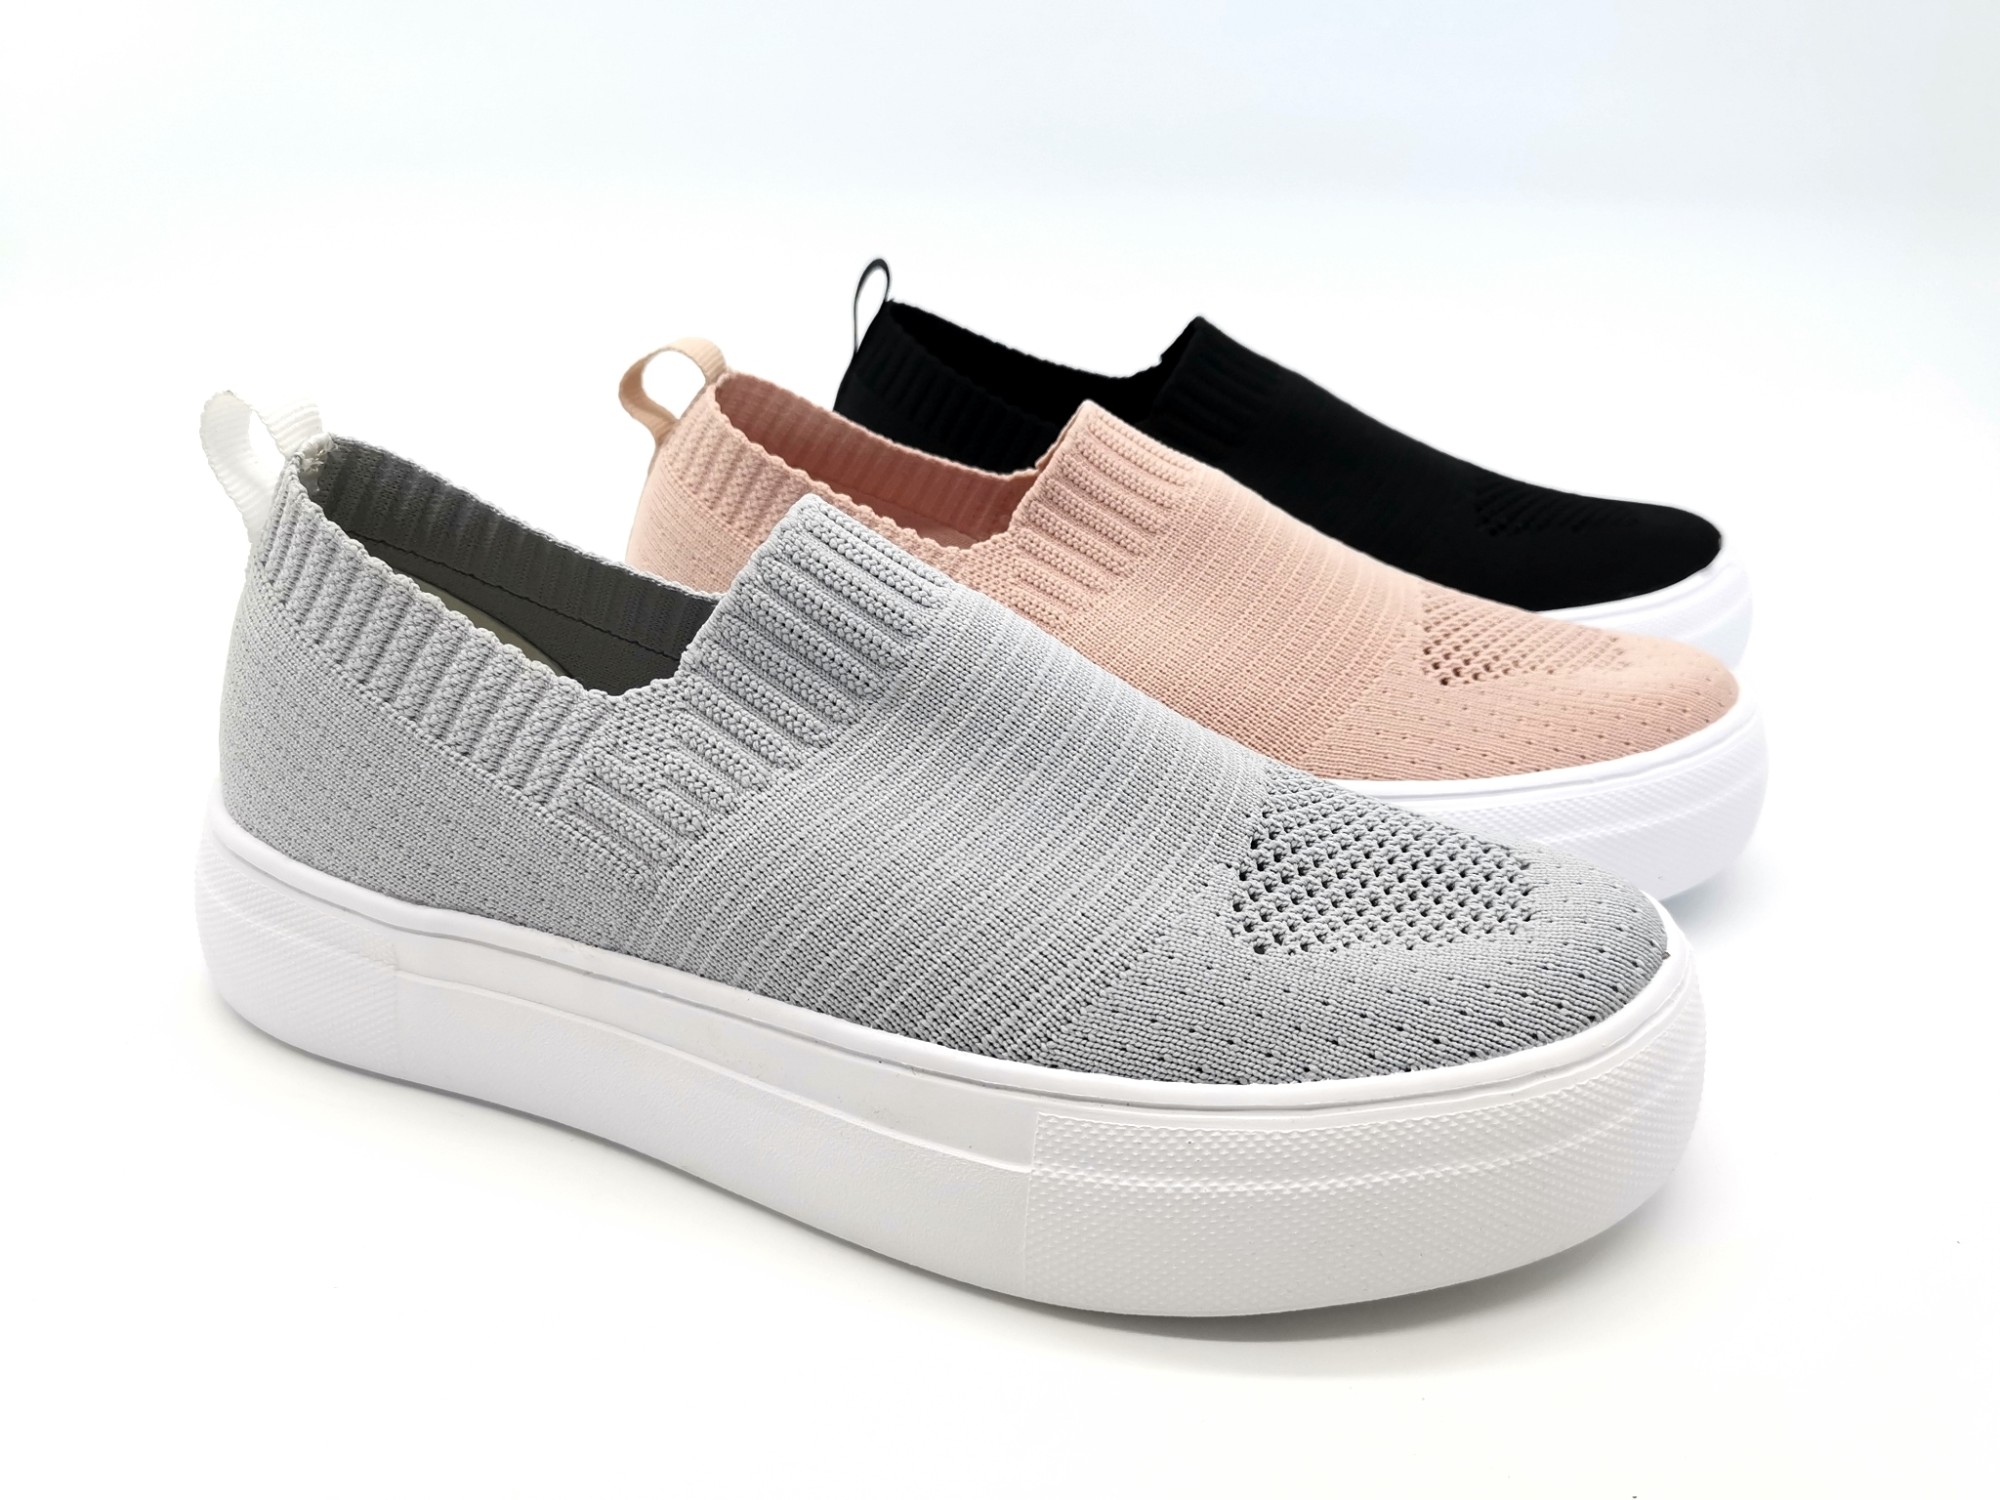 Latest Fly Knit Sneaker, extremly light and breathable Manufacturers, Latest Fly Knit Sneaker, extremly light and breathable Factory, Supply Latest Fly Knit Sneaker, extremly light and breathable